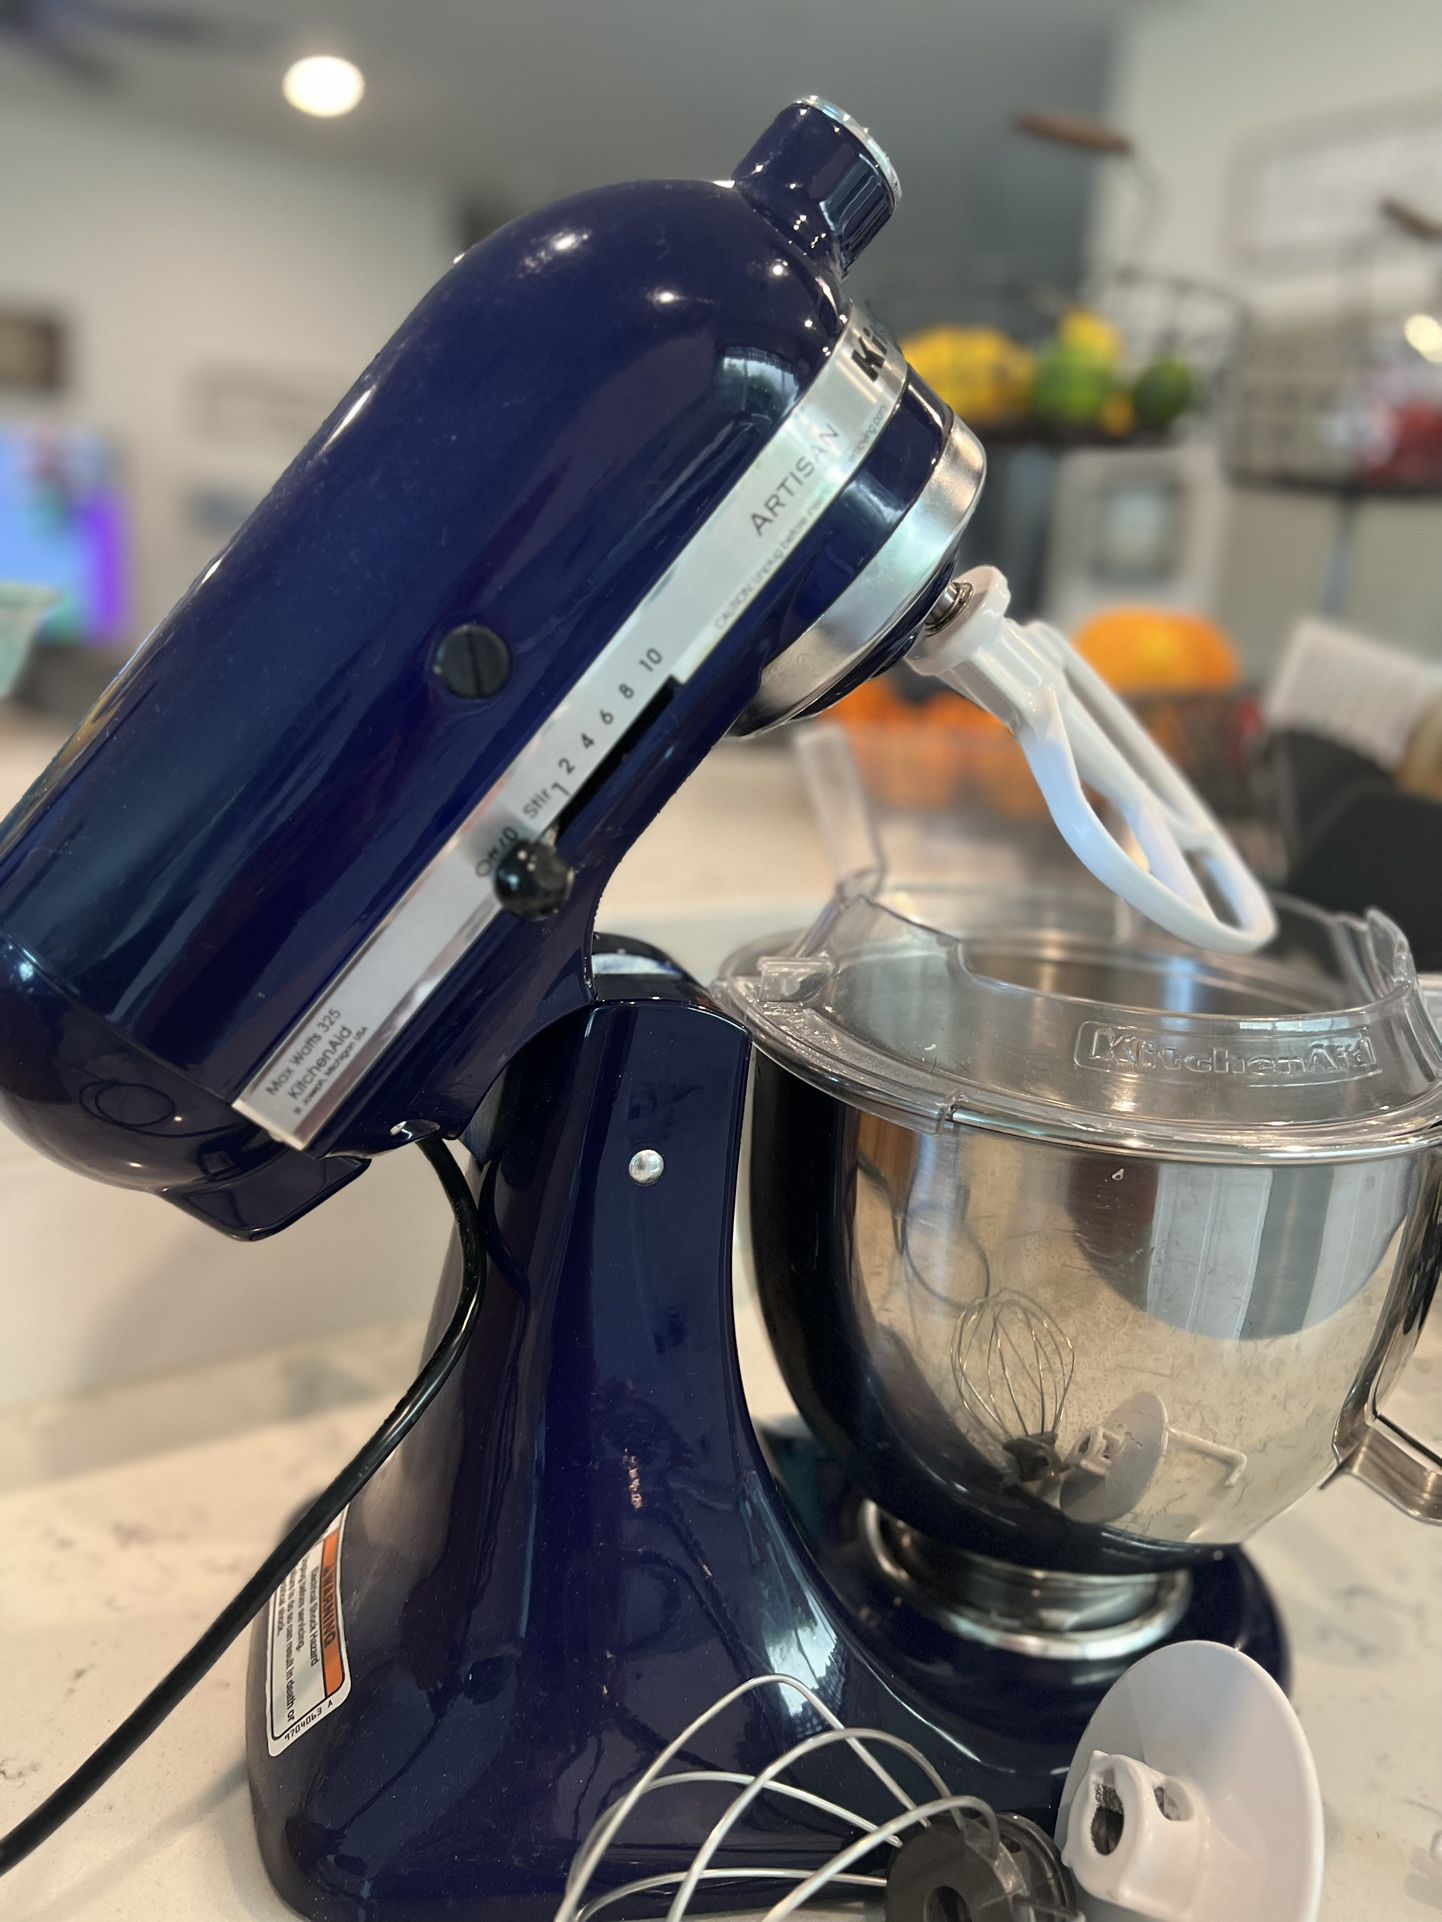 KitchenAid Artisan Stand Mixer, 5-Qt. for Sale in San Diego, CA - OfferUp